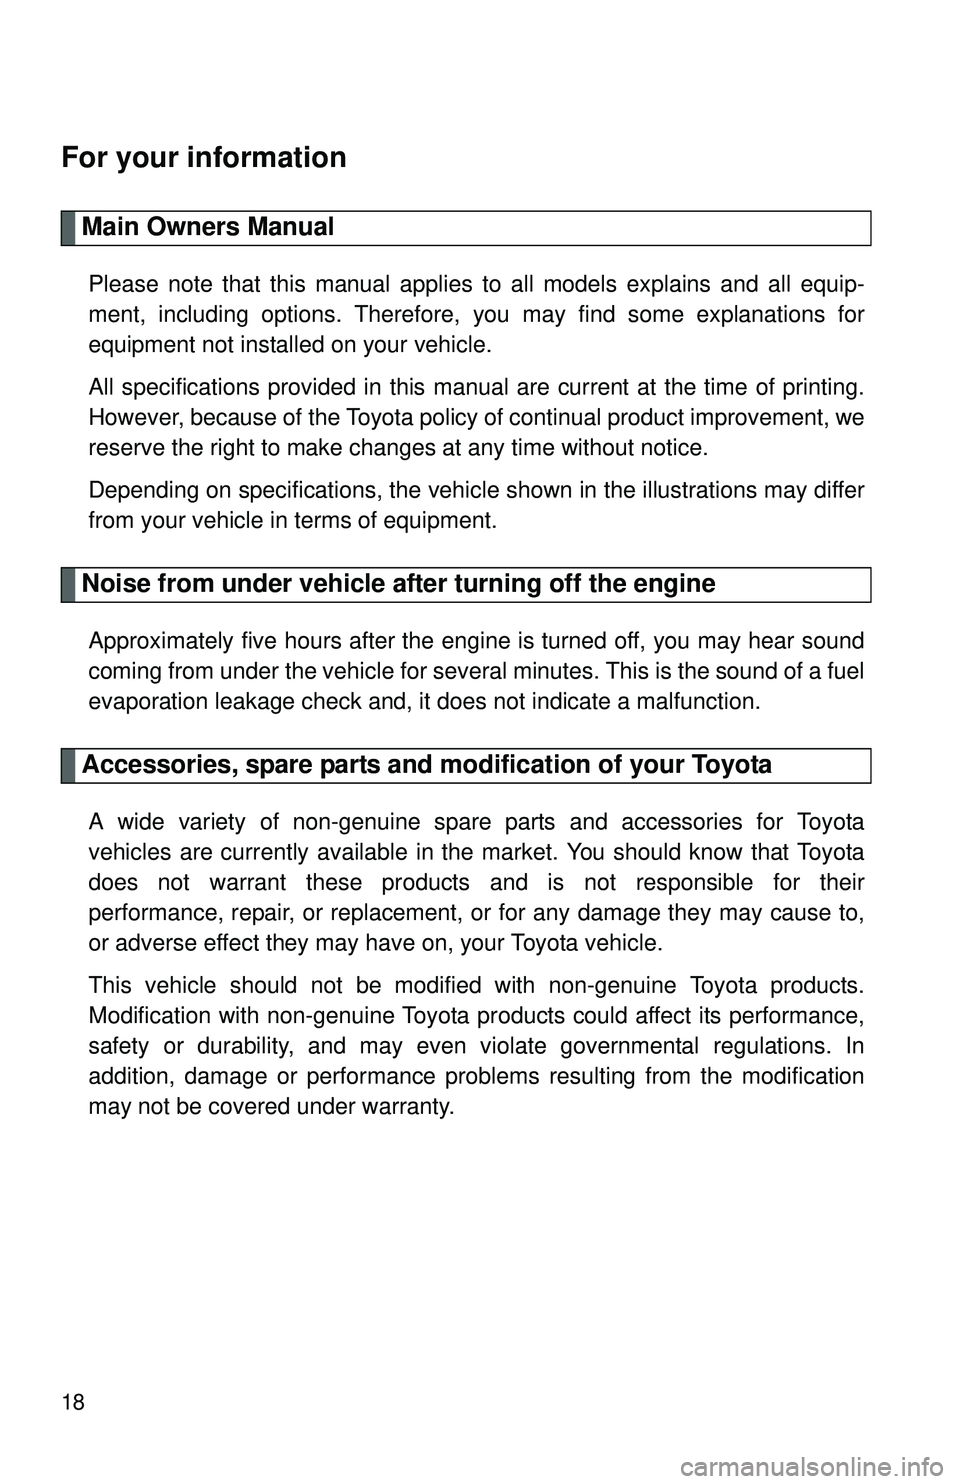 TOYOTA YARIS SEDAN 2011  Owners Manual 18
For your information
Main Owners Manual
Please note that this manual applies to all models explains and all equip-
ment, including options. Therefore, you may find some explanations for
equipment n